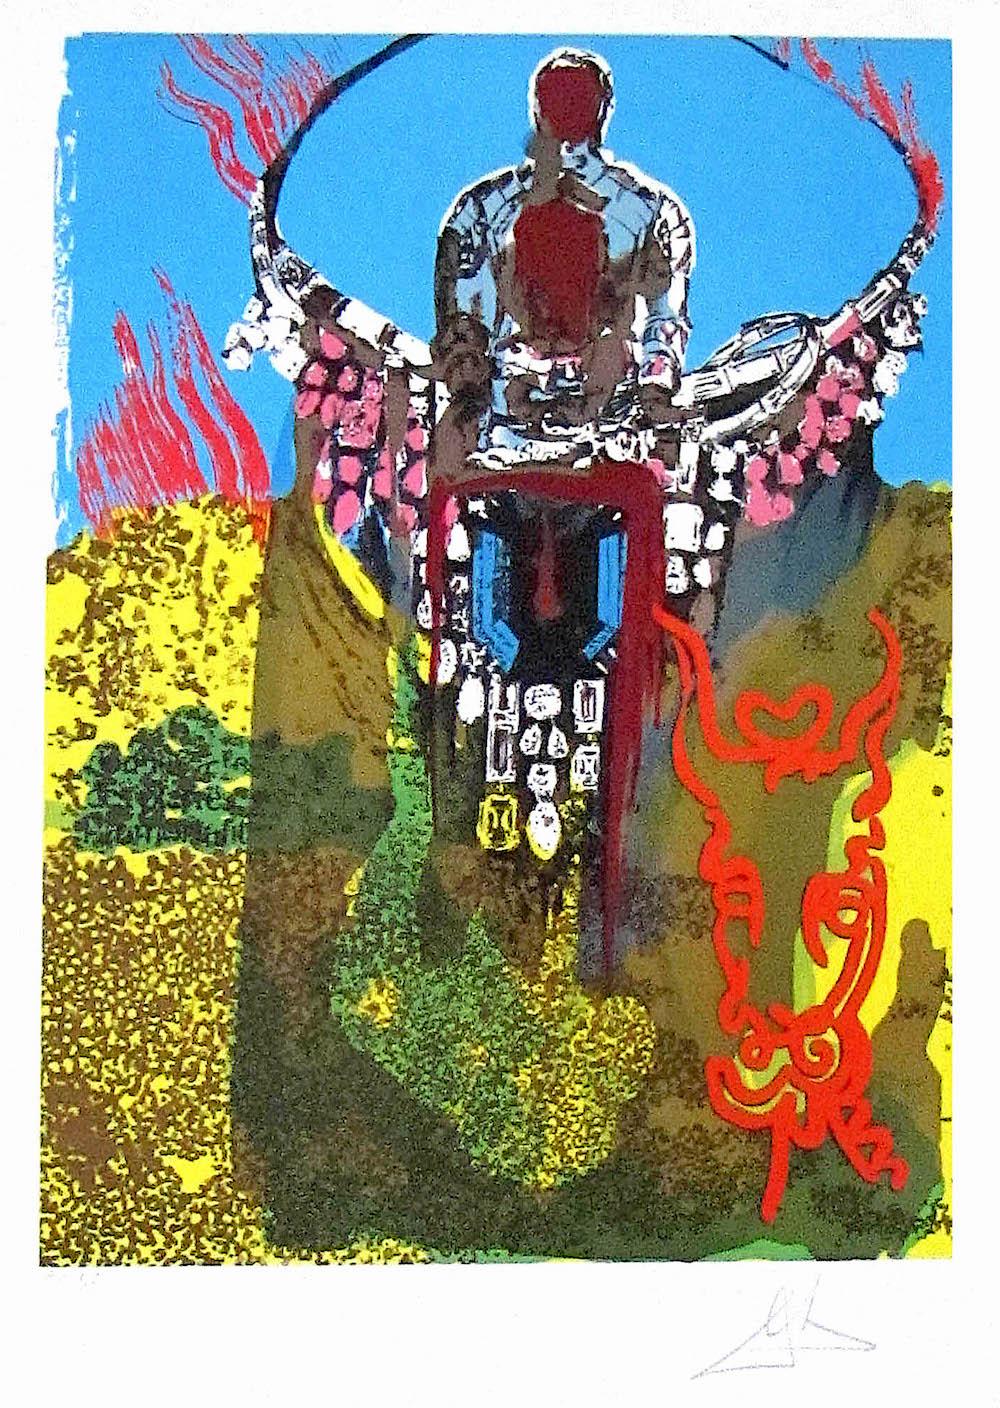 THE BULLFIGHTER(The Golden Calf) Signed Lithograph Surreal Portrait Tarot Card 